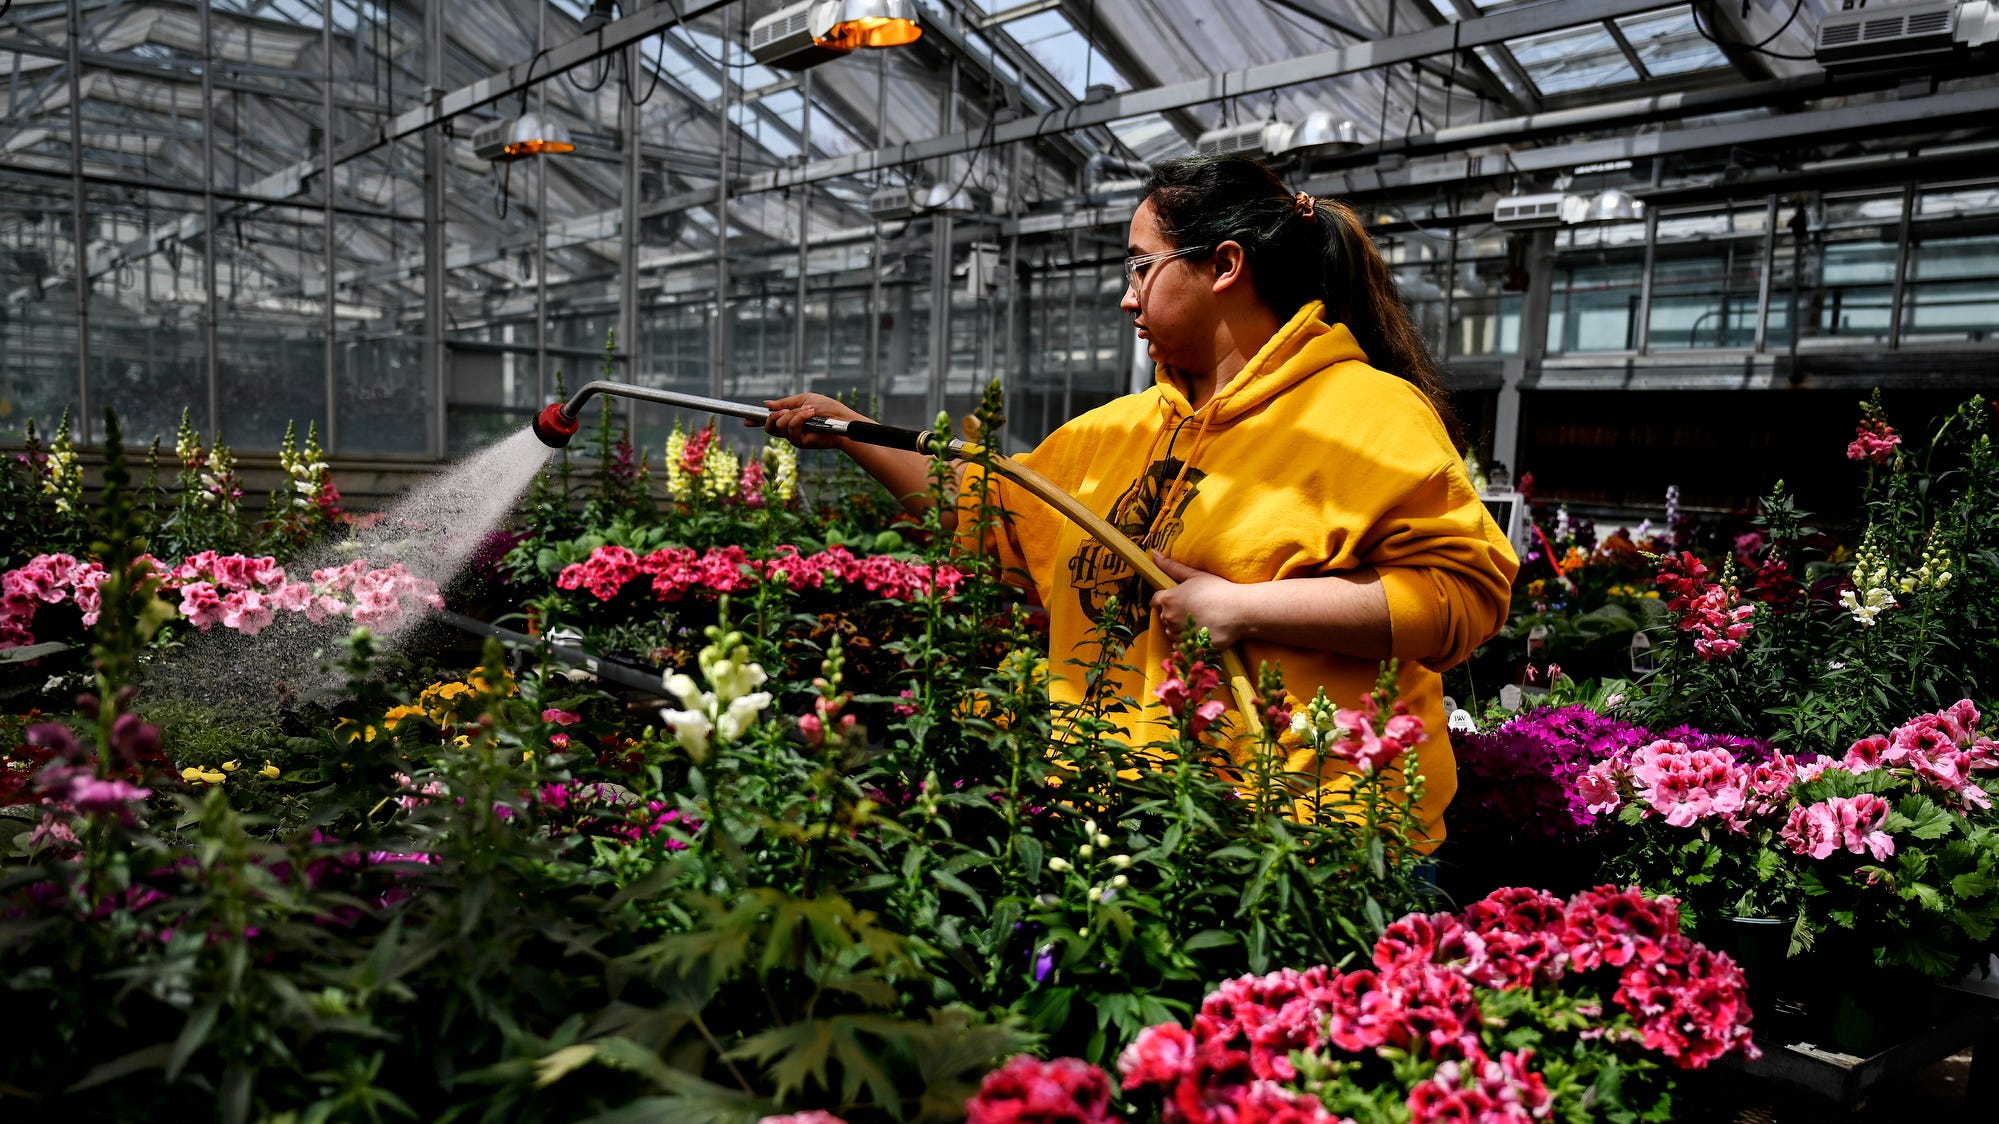 Michigan State horticulture plant sale April 23-24 in Lansing